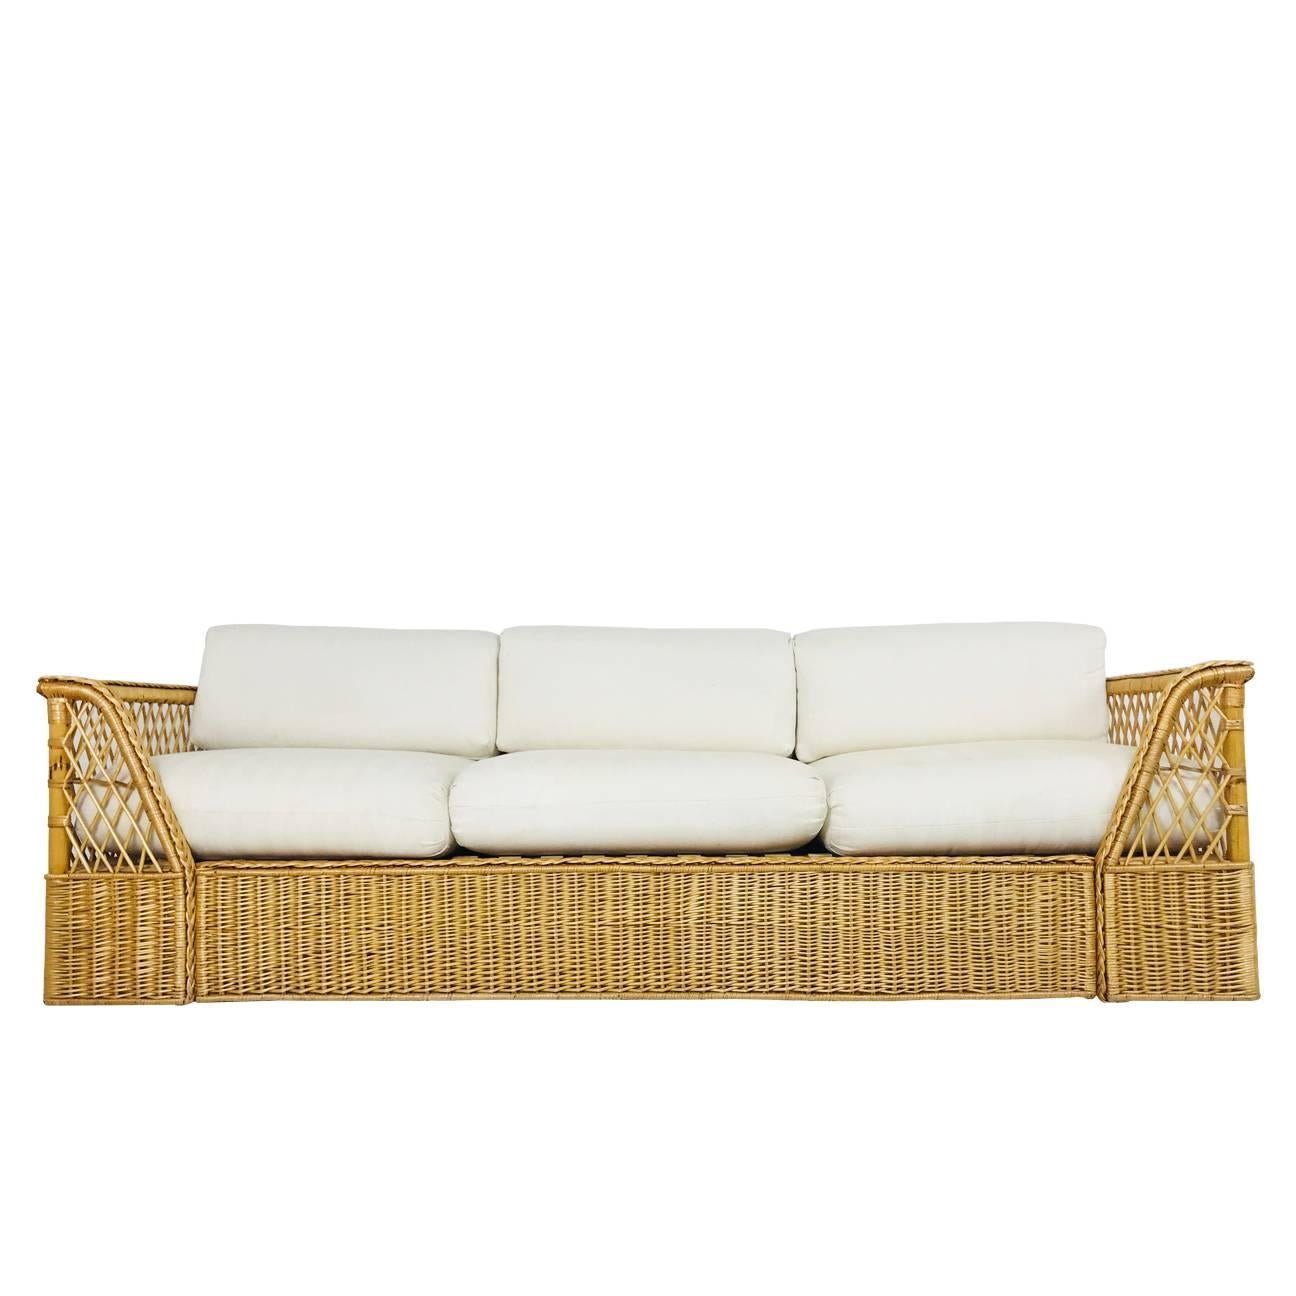 Rattan Sofa with Upholstered Cushions by McGuire